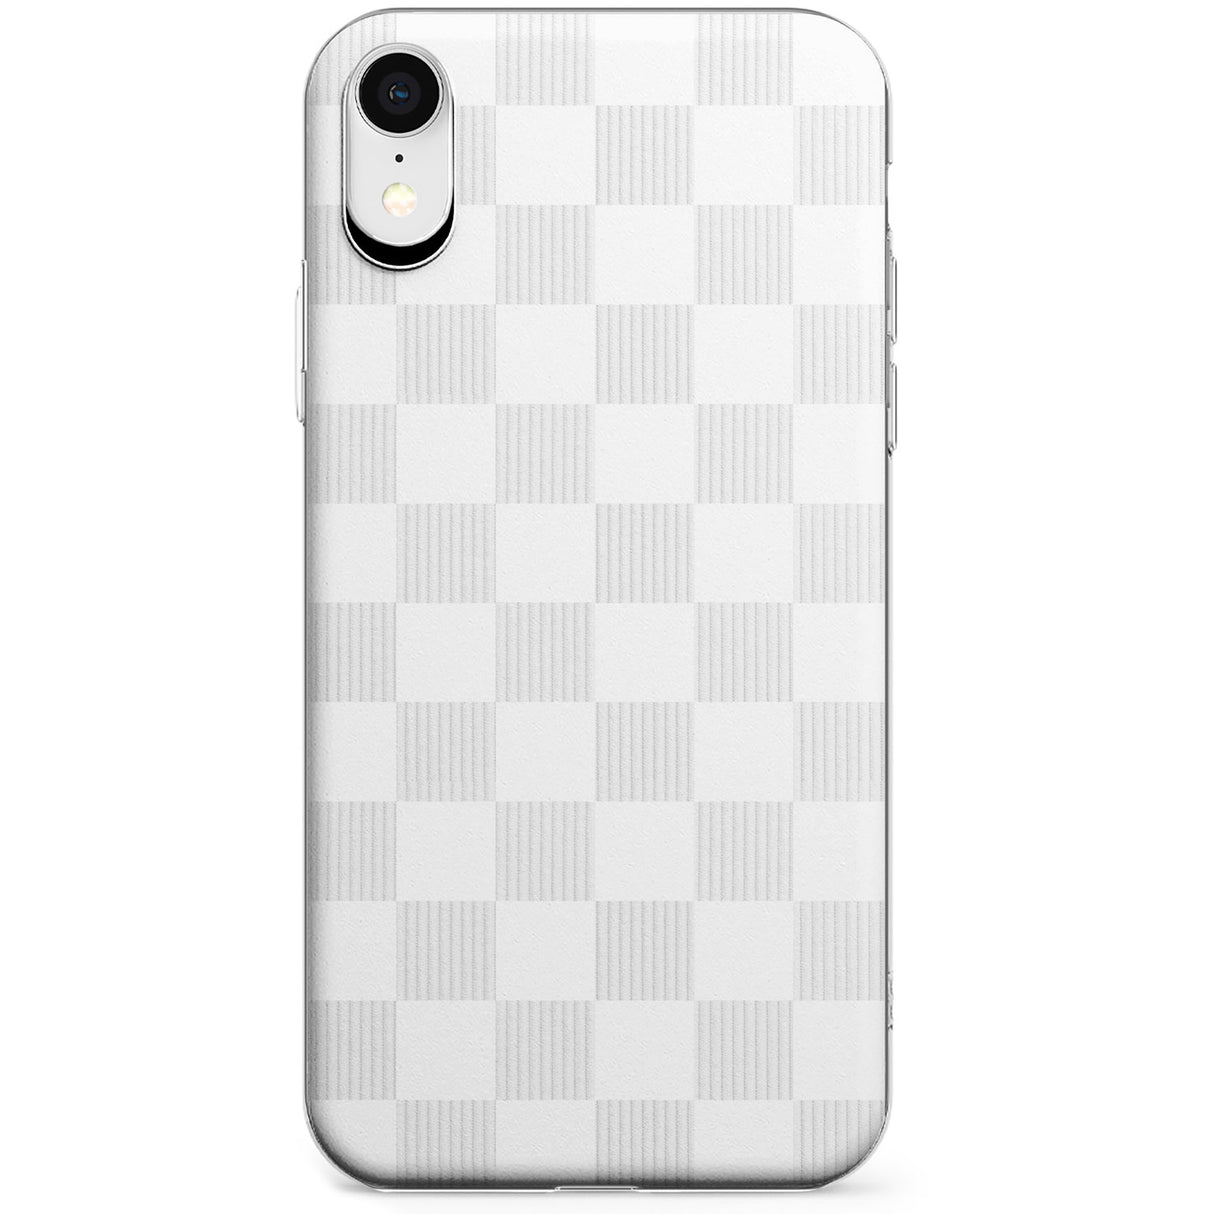 WHITE CHECKERED Phone Case for iPhone X, XS Max, XR